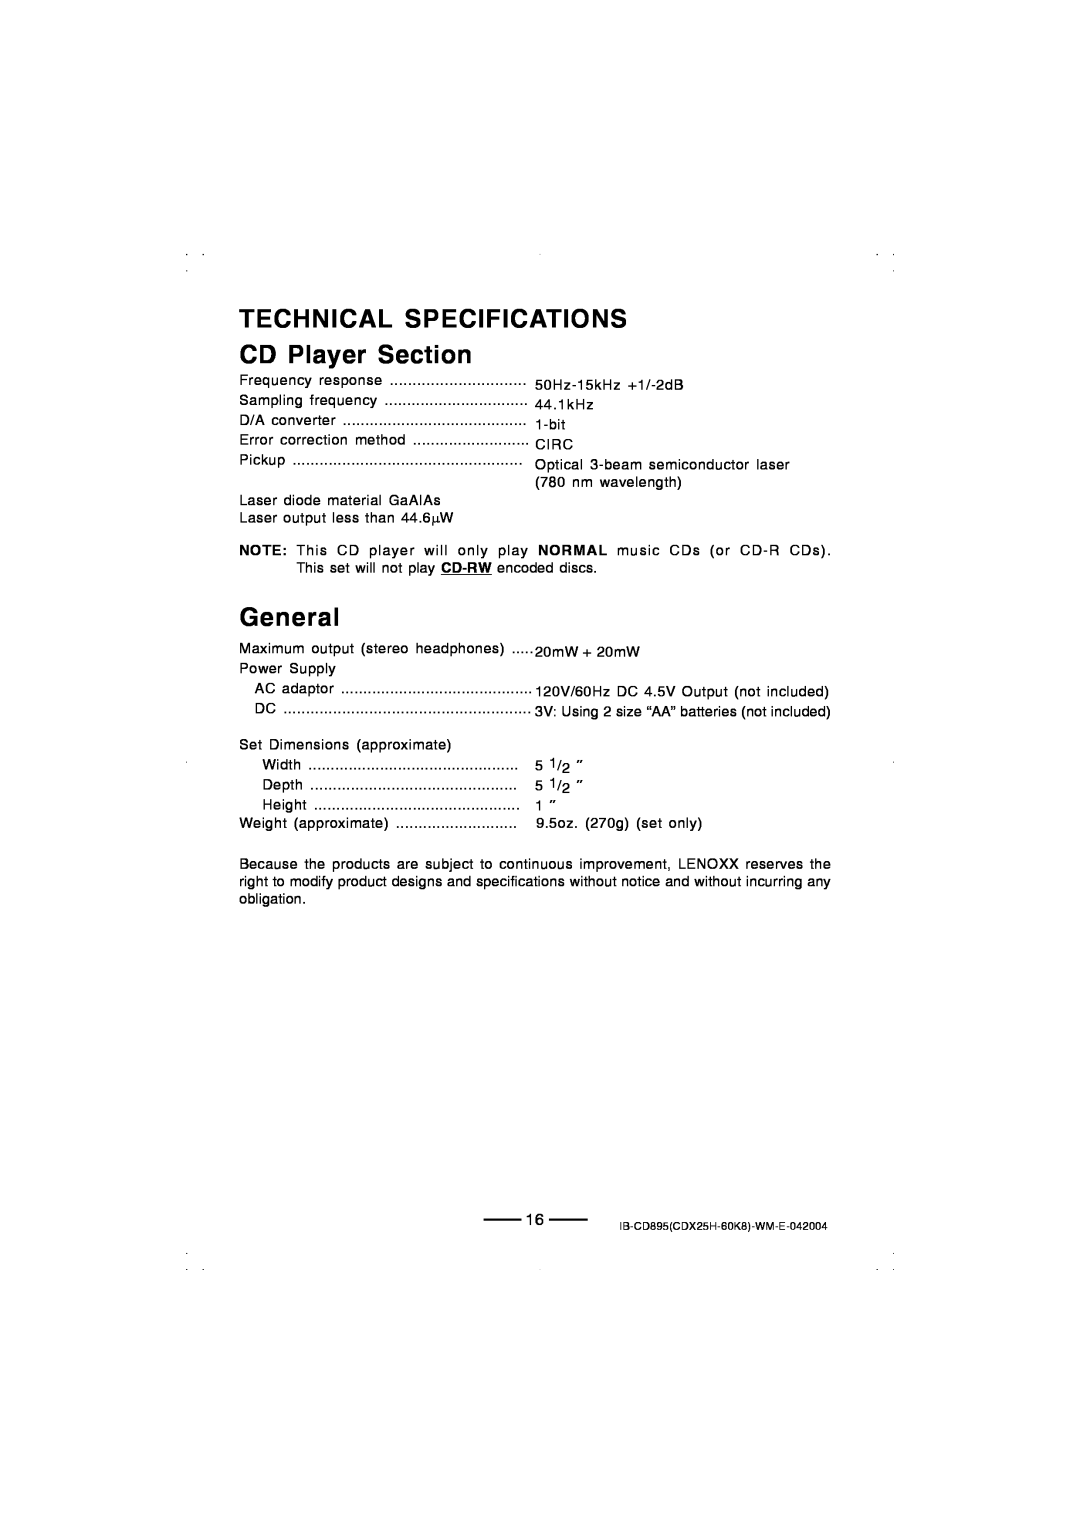 Lenoxx Electronics CD-895 manual Technical Specifications, CD Player Section, General 